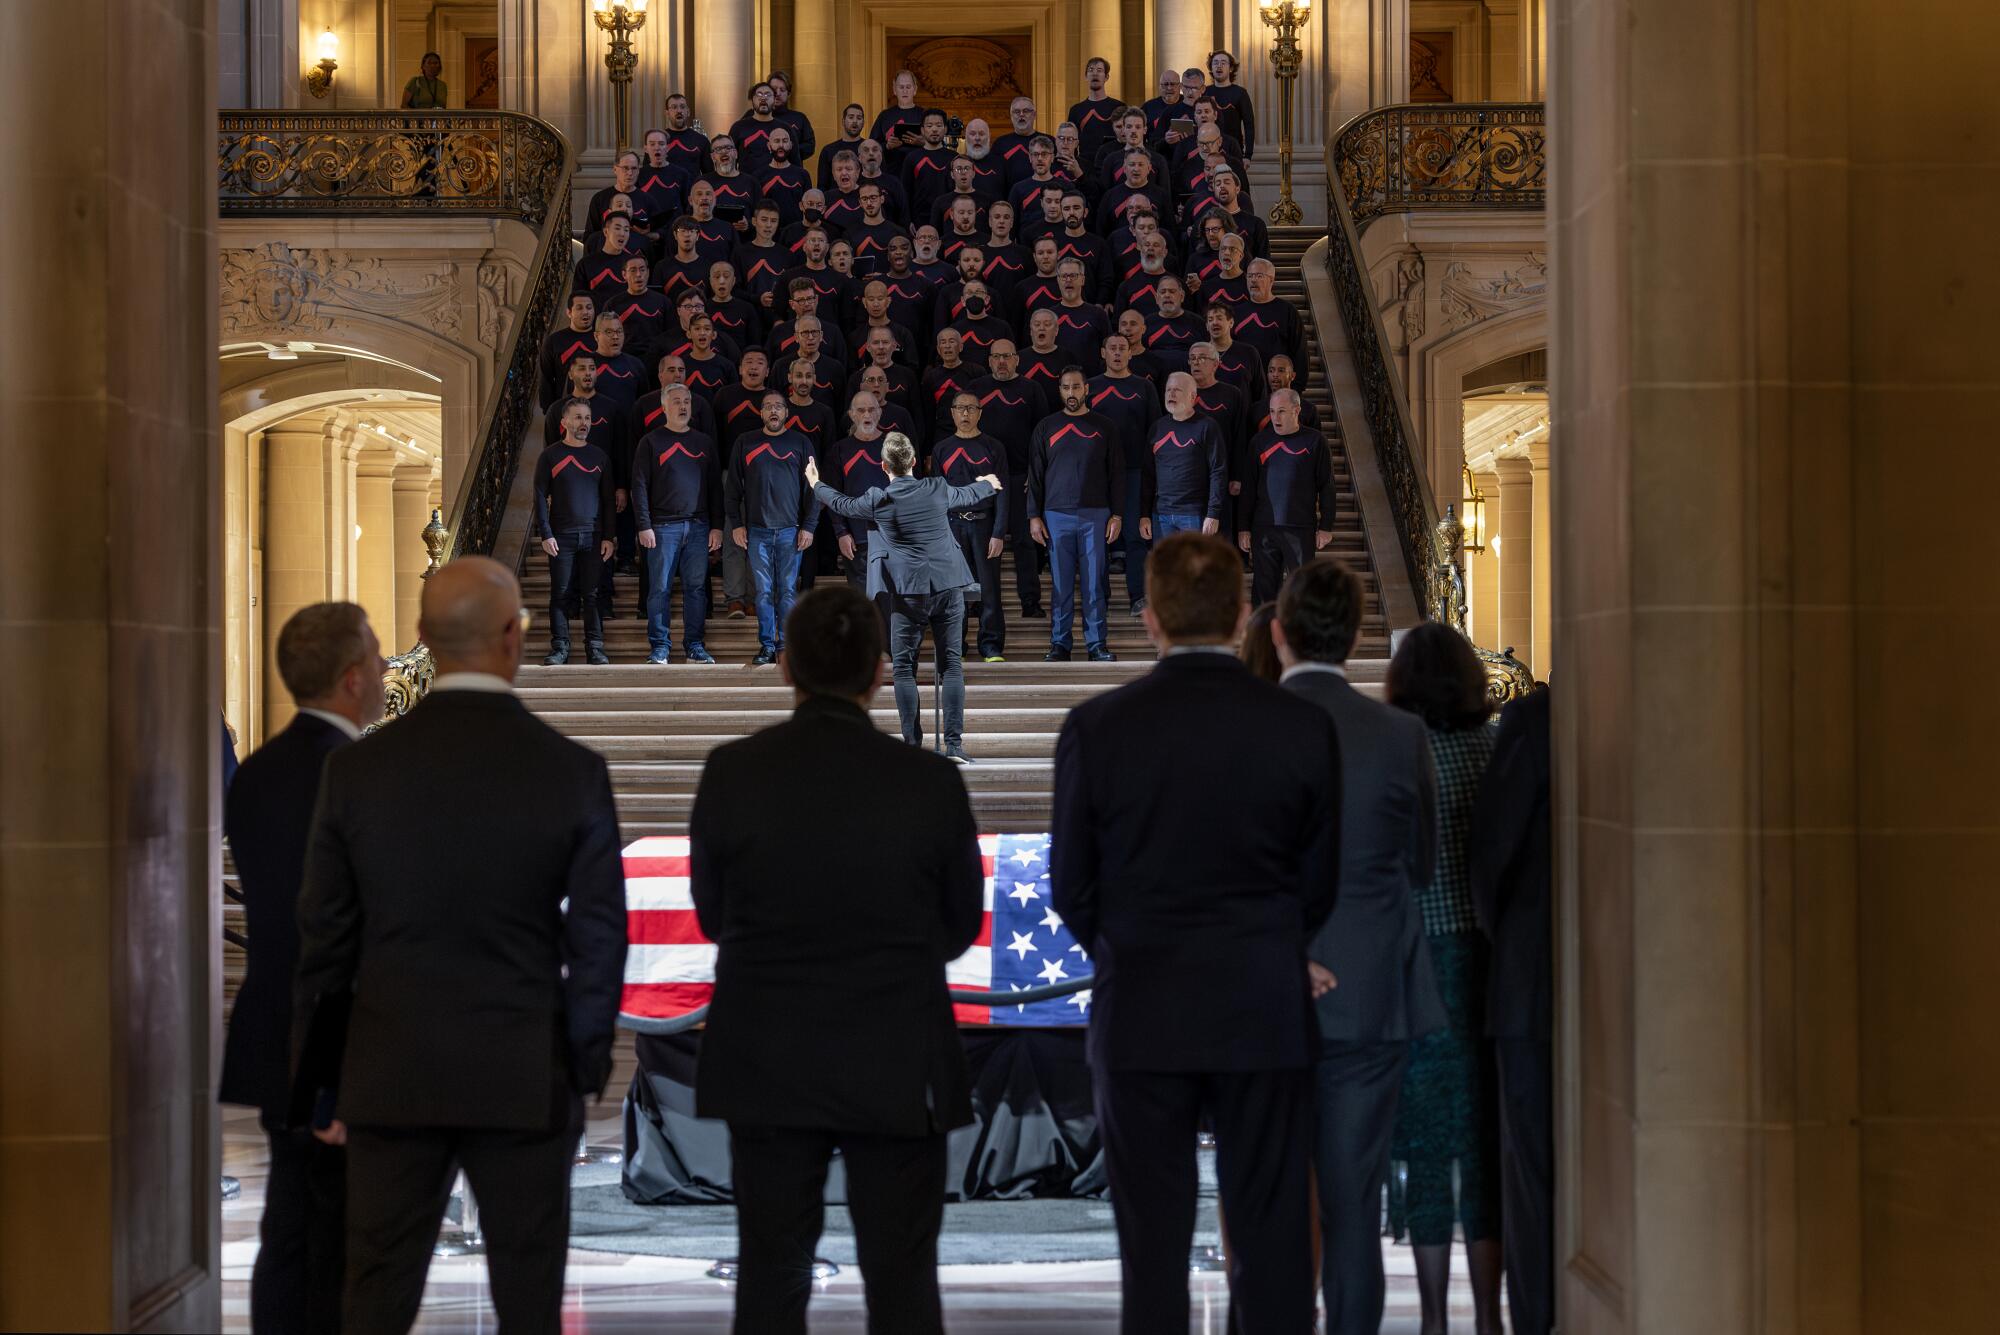 The San Francisco Gay Men's Chorus sings tributes to the late Sen. Dianne Feinstein while she lies in state